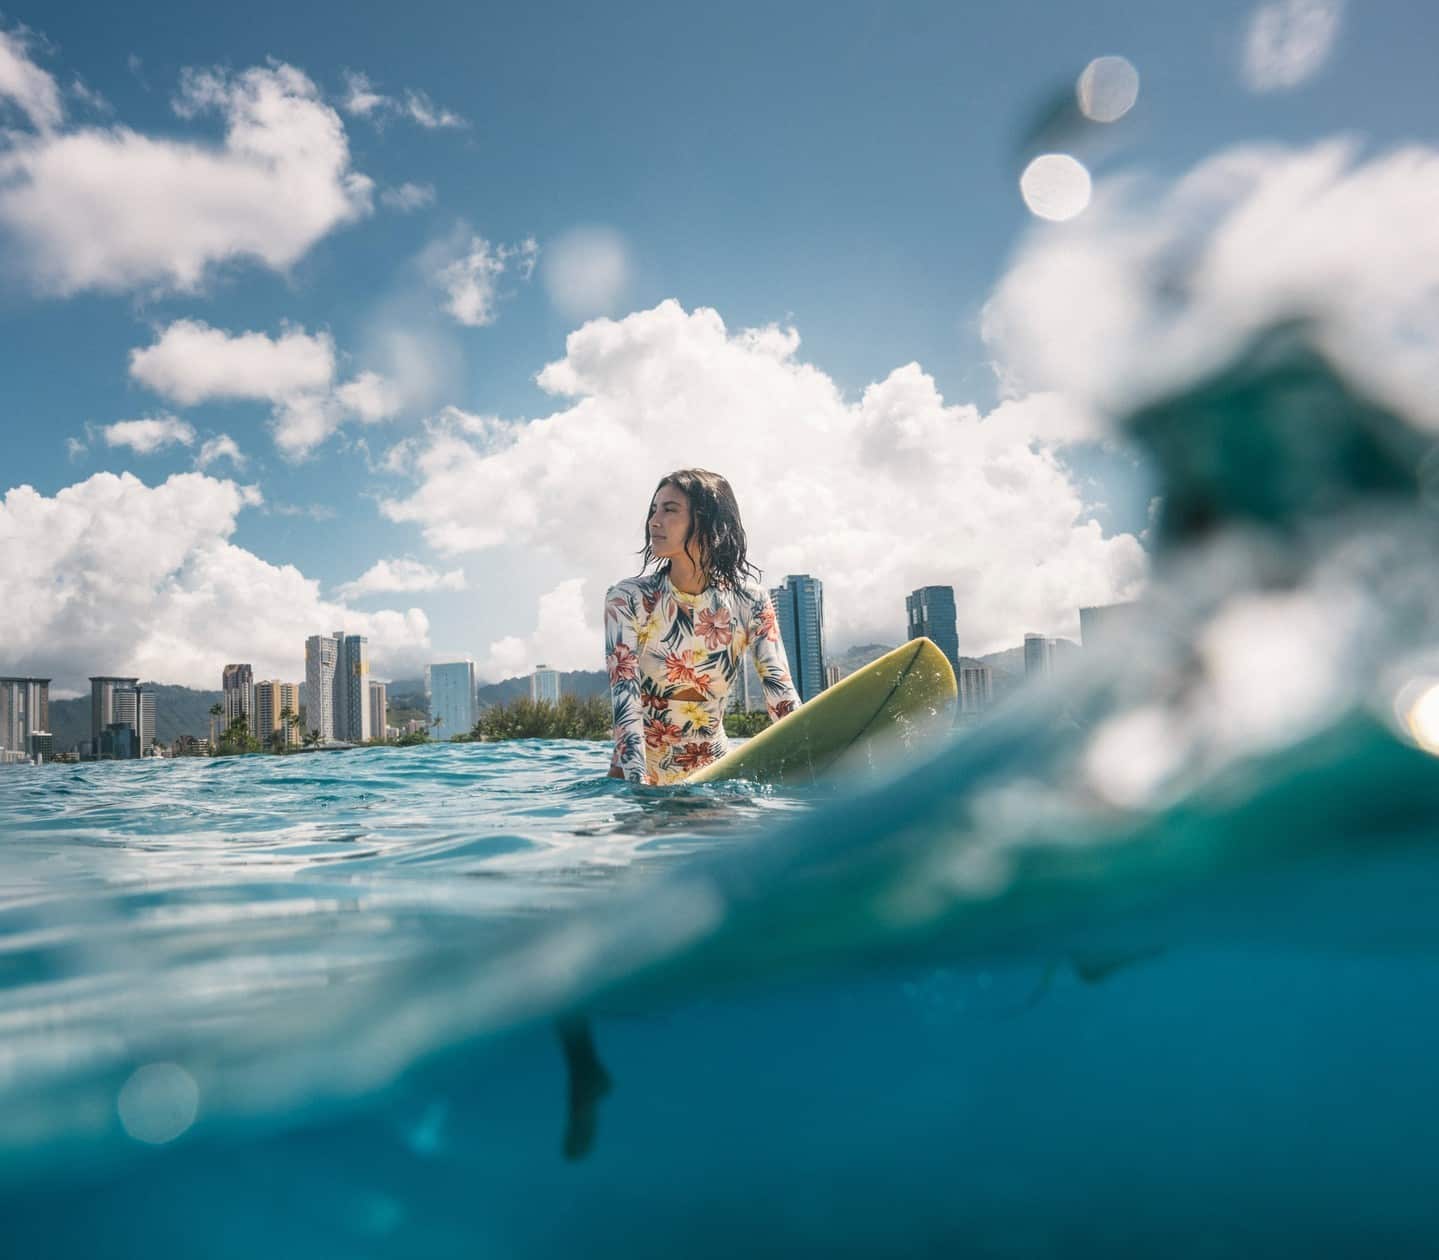 Skip the commute by checking the surf conditions before you paddle out! Our South Shore Surf Cam is live 24/7, streaming all your favorite breaks including Ala Moana Beach Park, Kewalos, Concessions, and more. Visit the link in our bio .